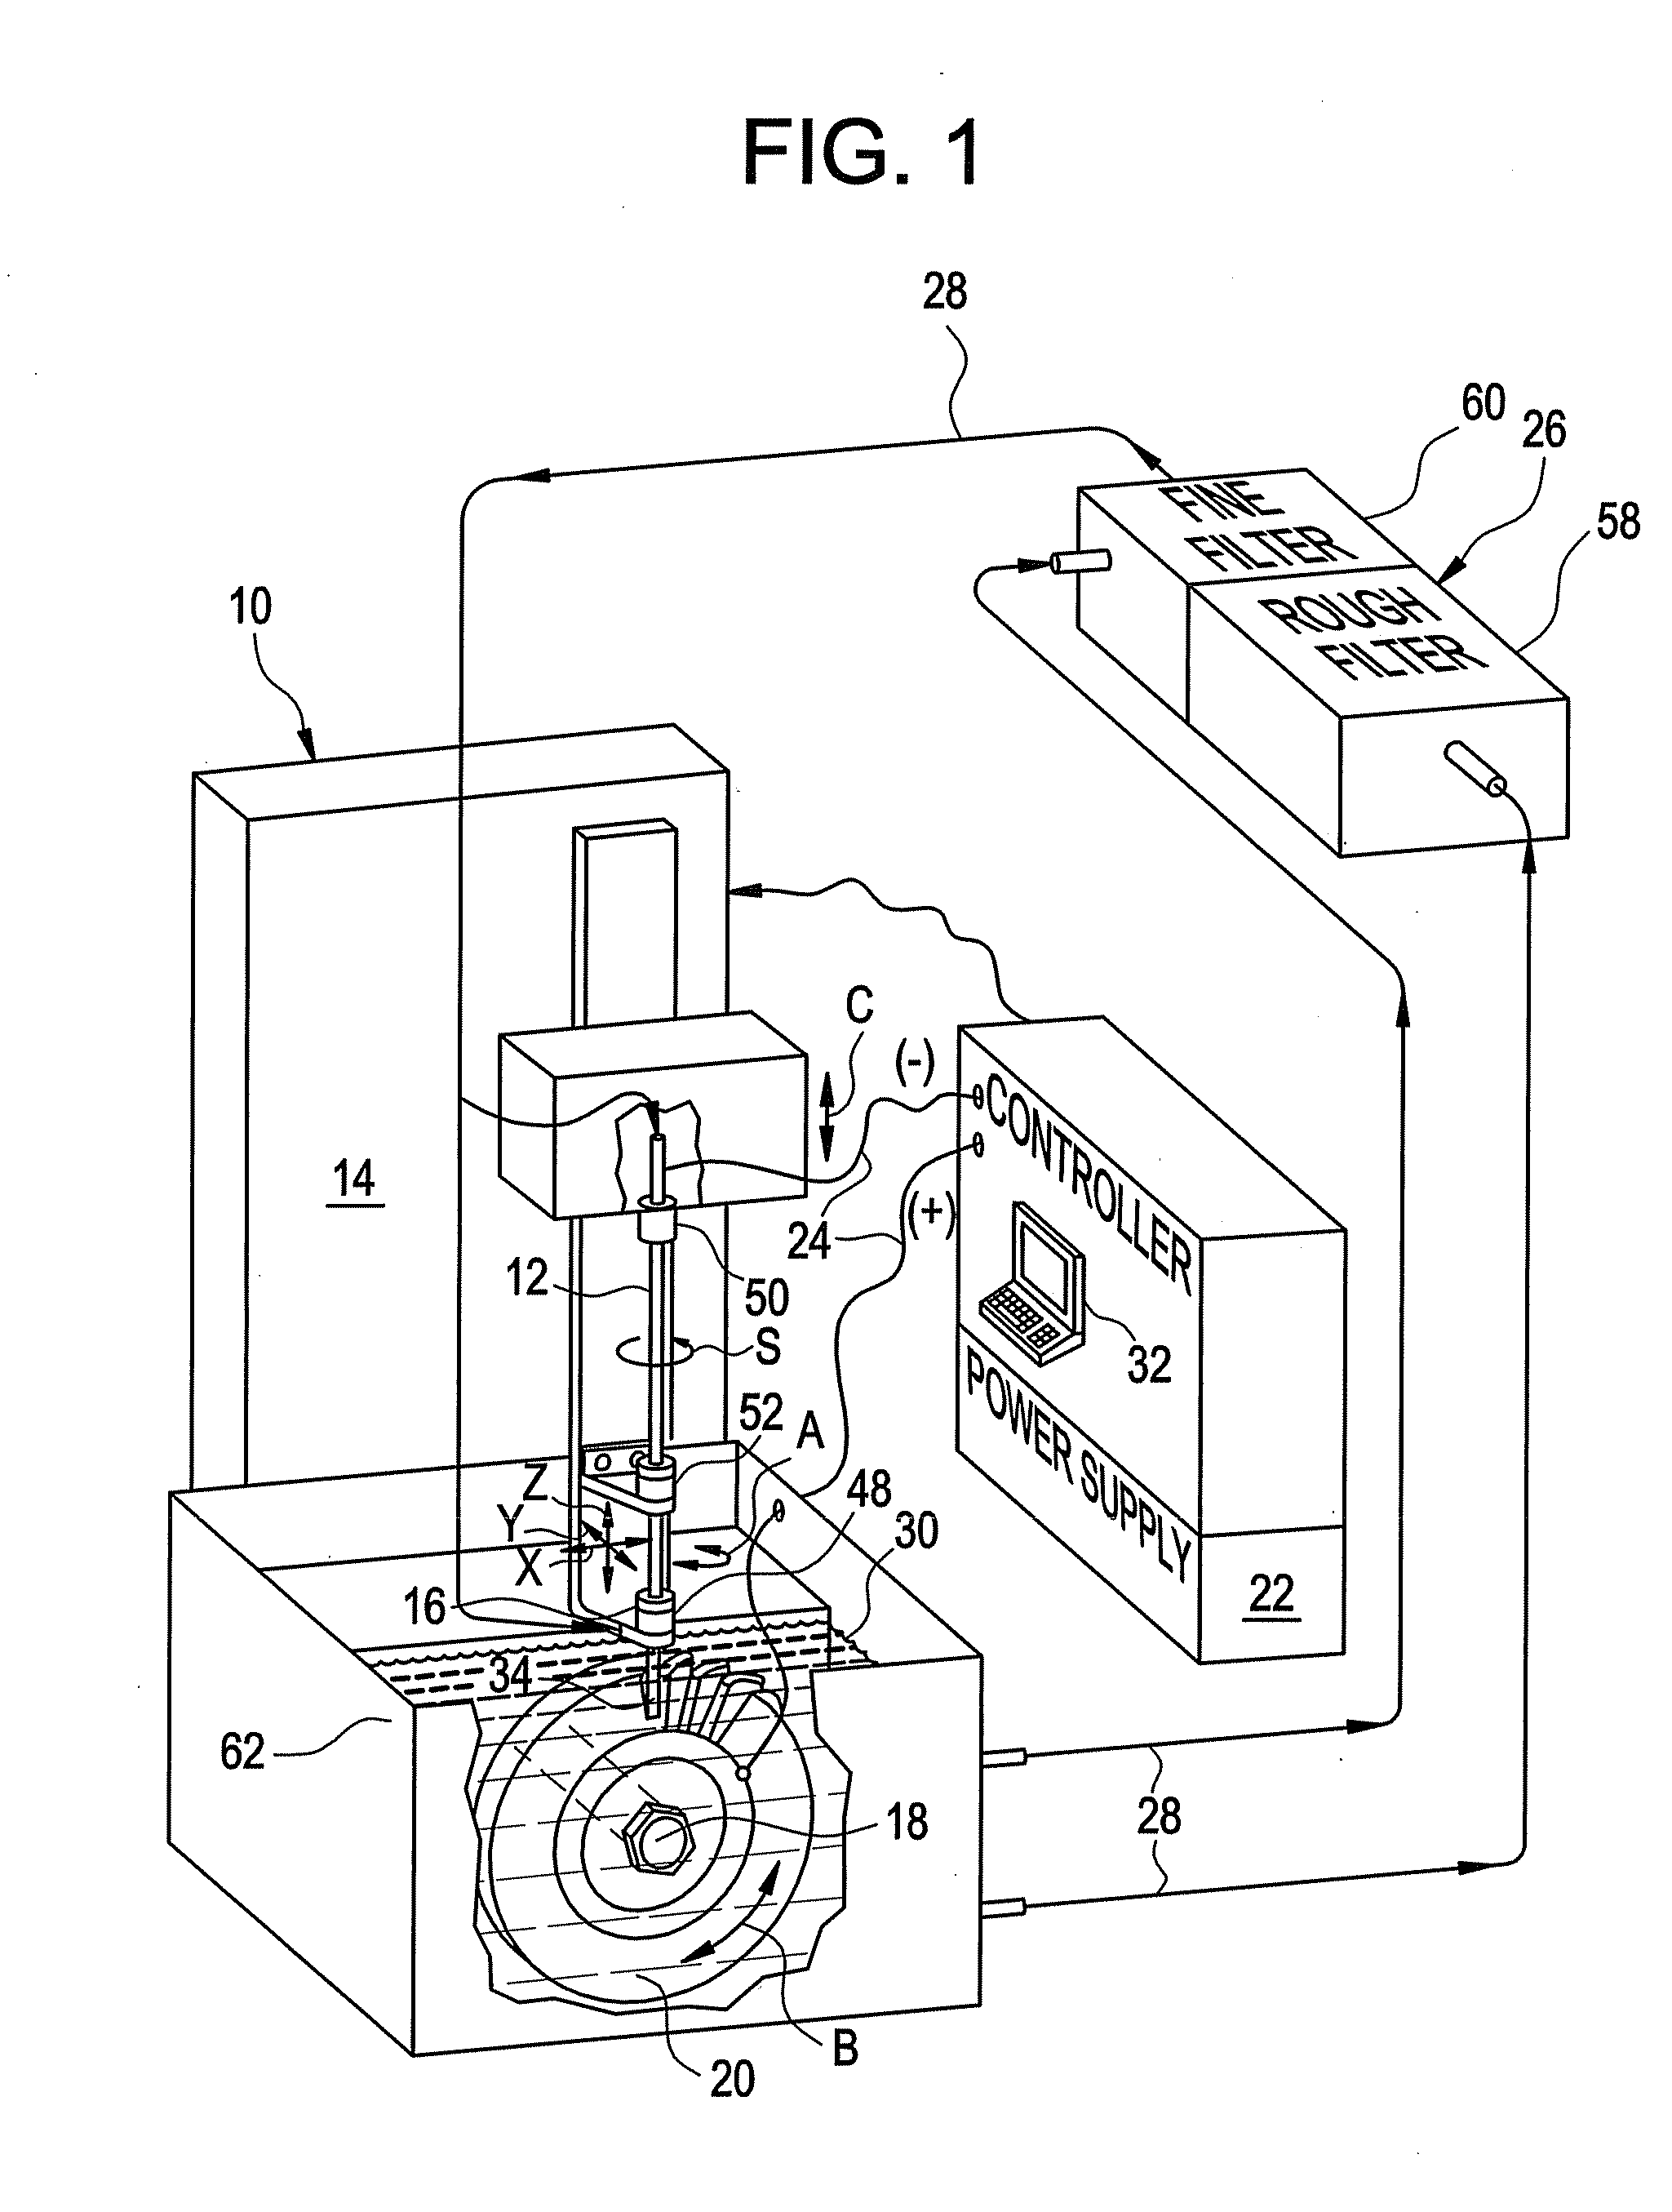 Methods and Apparatus for Electroerosion